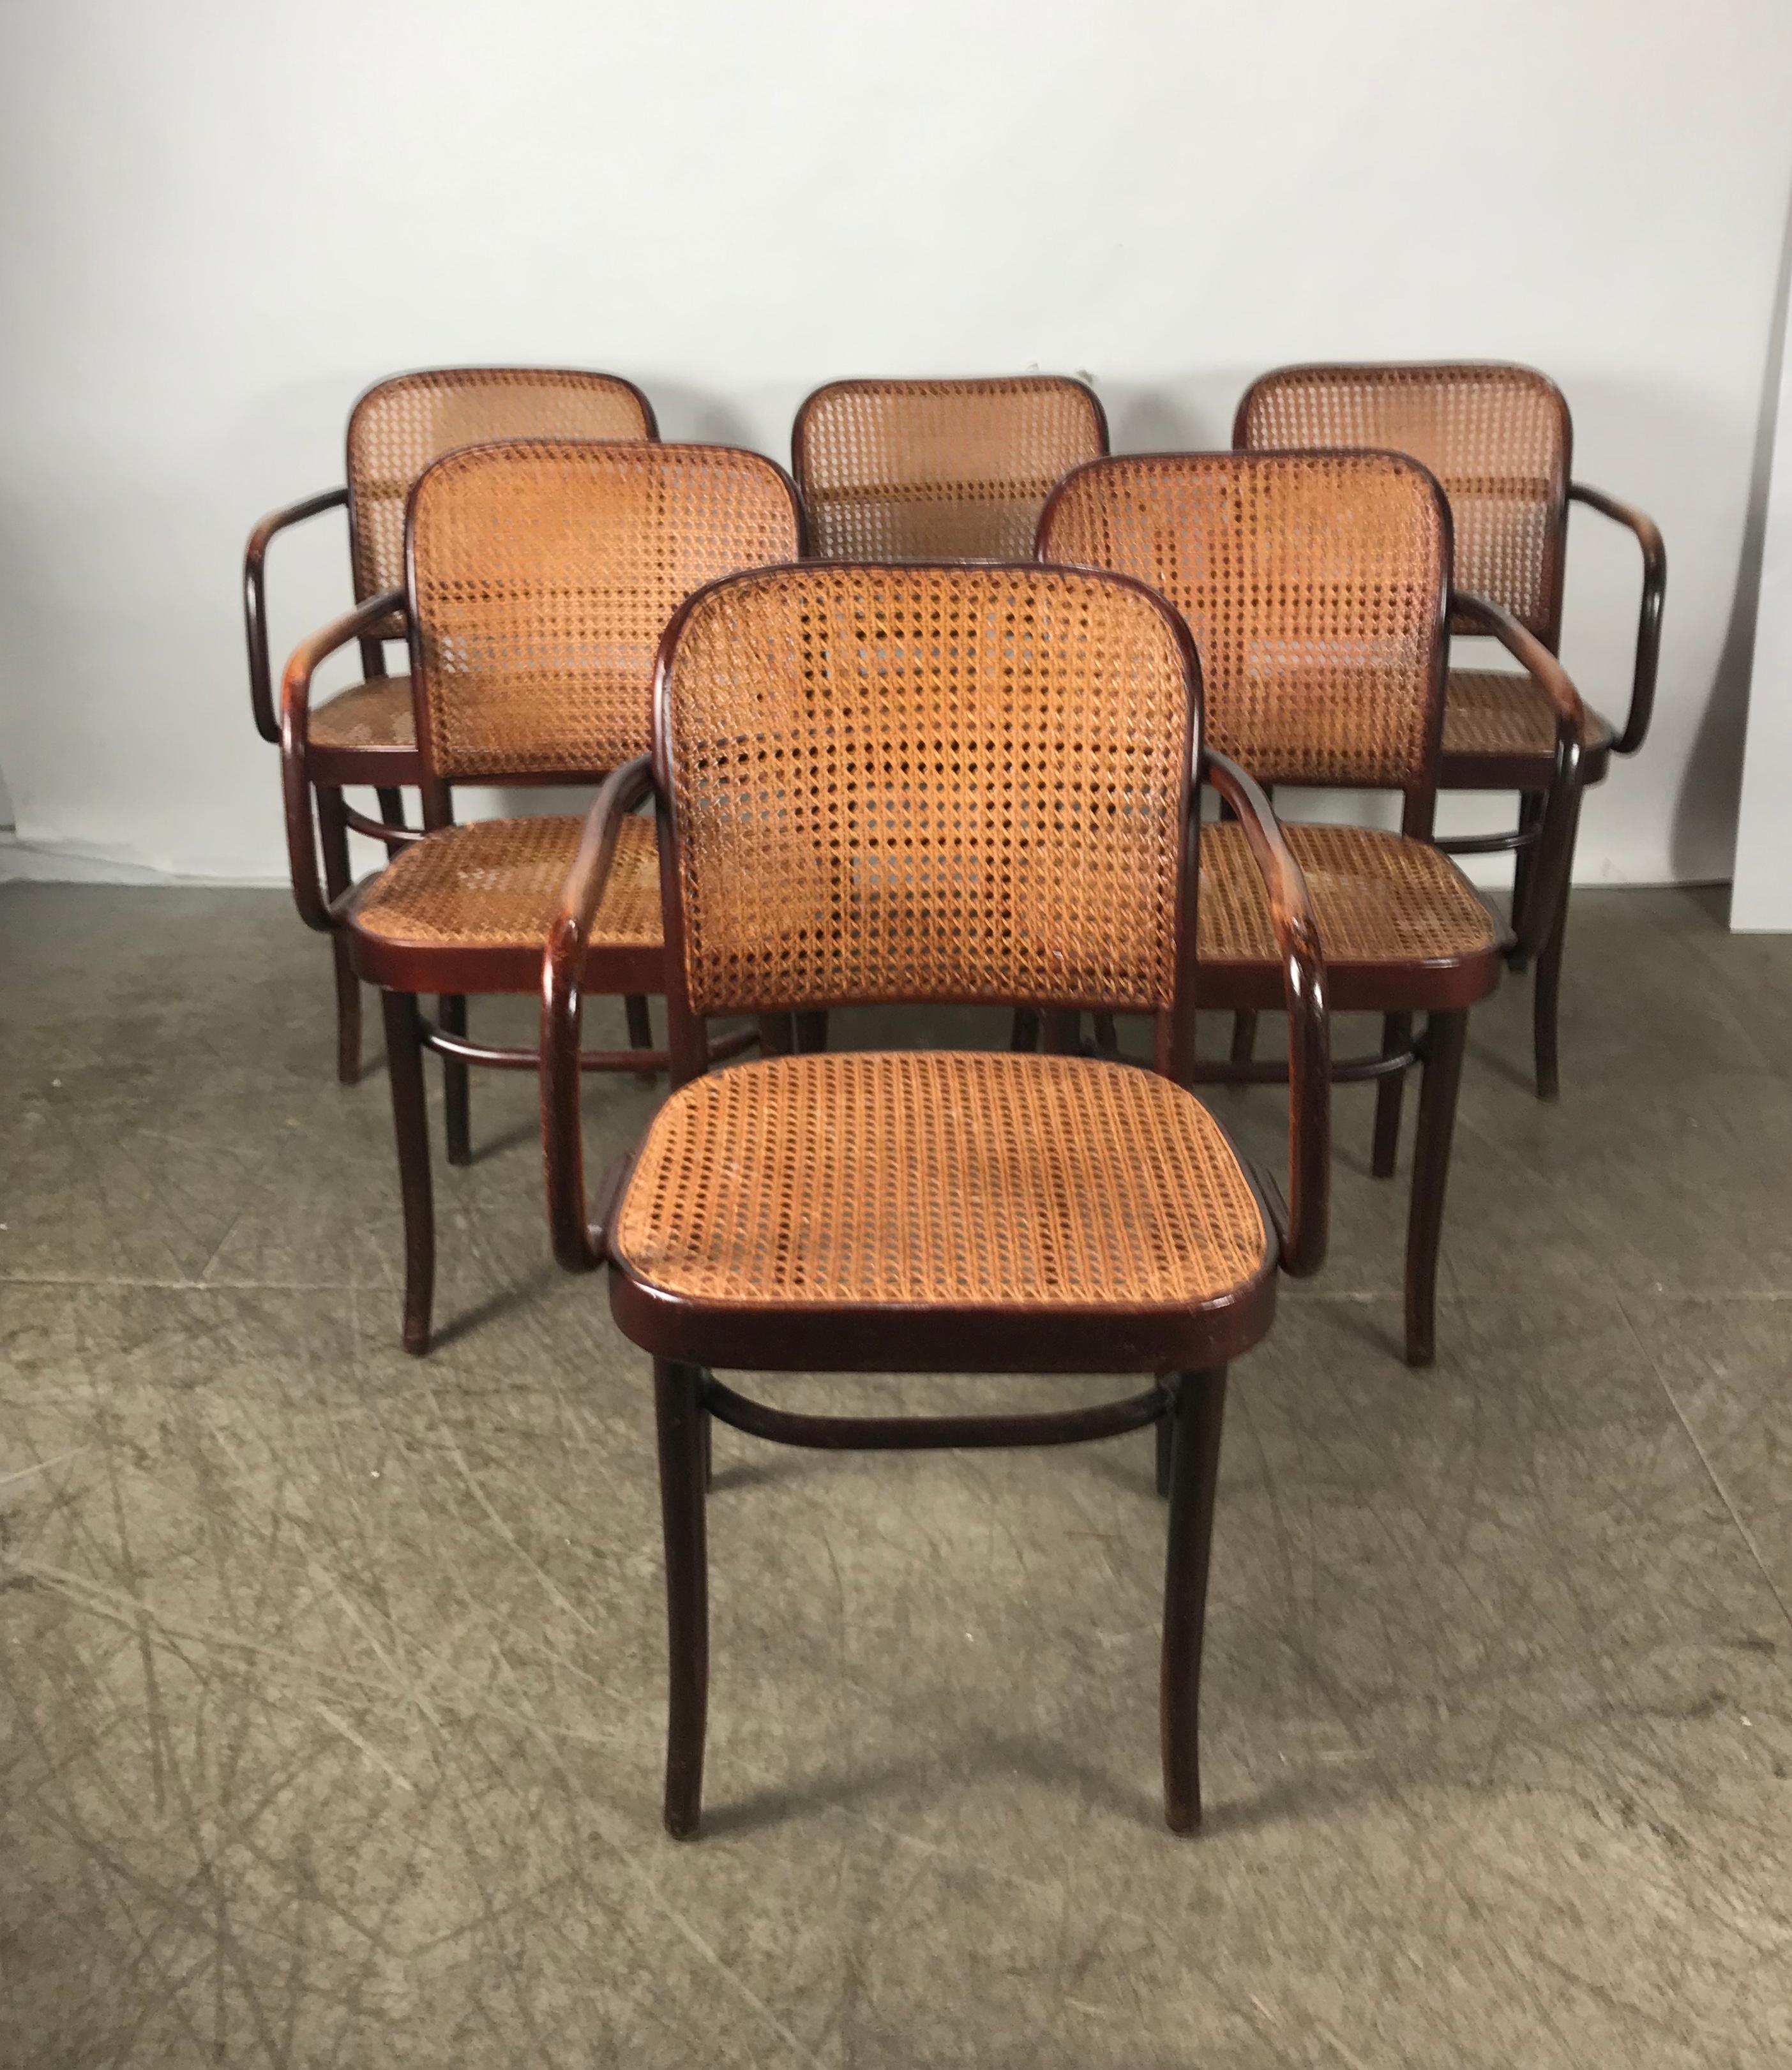 Classic set of 6 dining room armchairs designed by Josef Hoffmann, coined the 